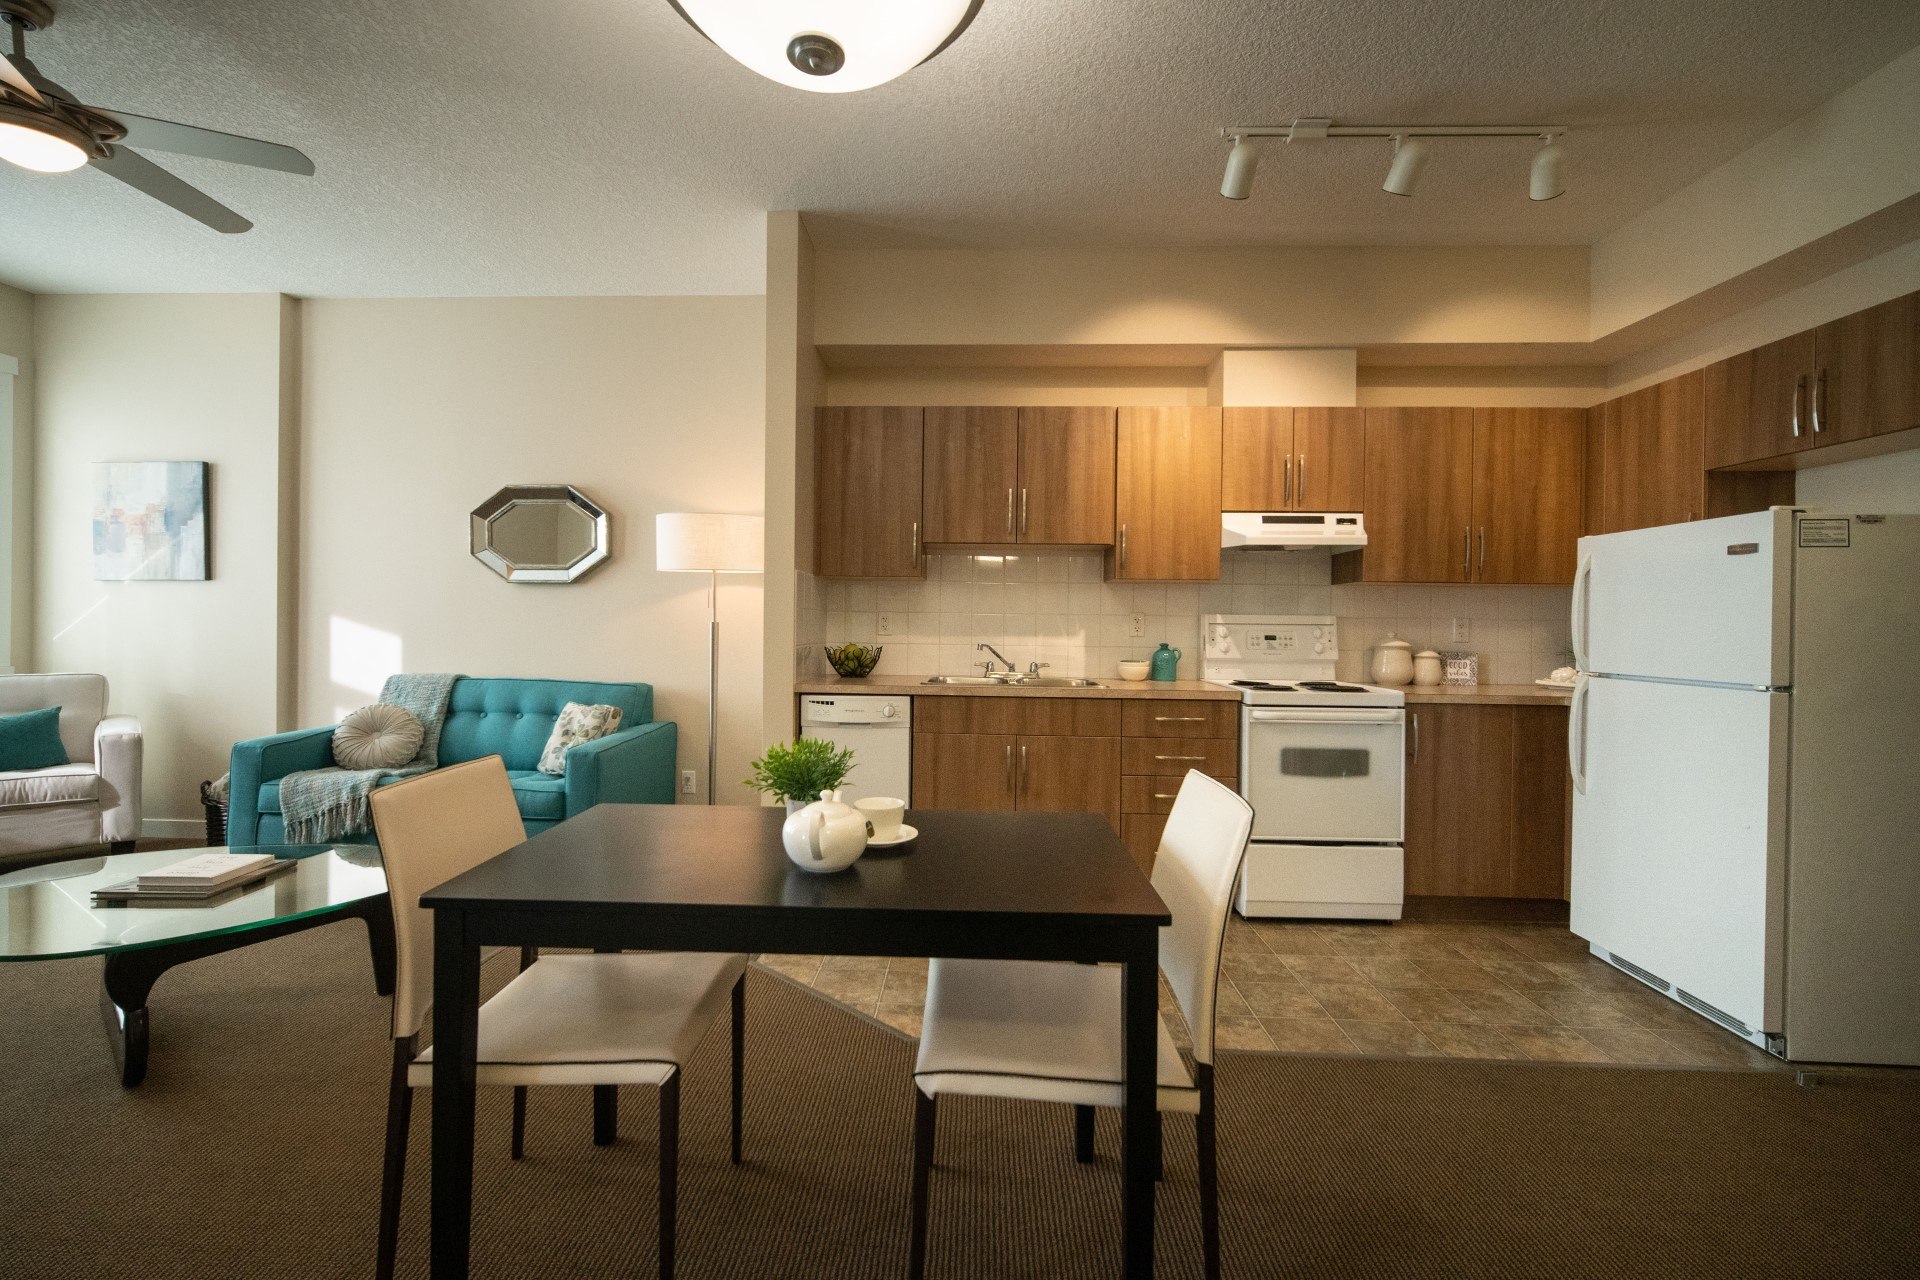 Full kitchens and dining areas in apartments at Willow Park on the Bow in Bridgeland